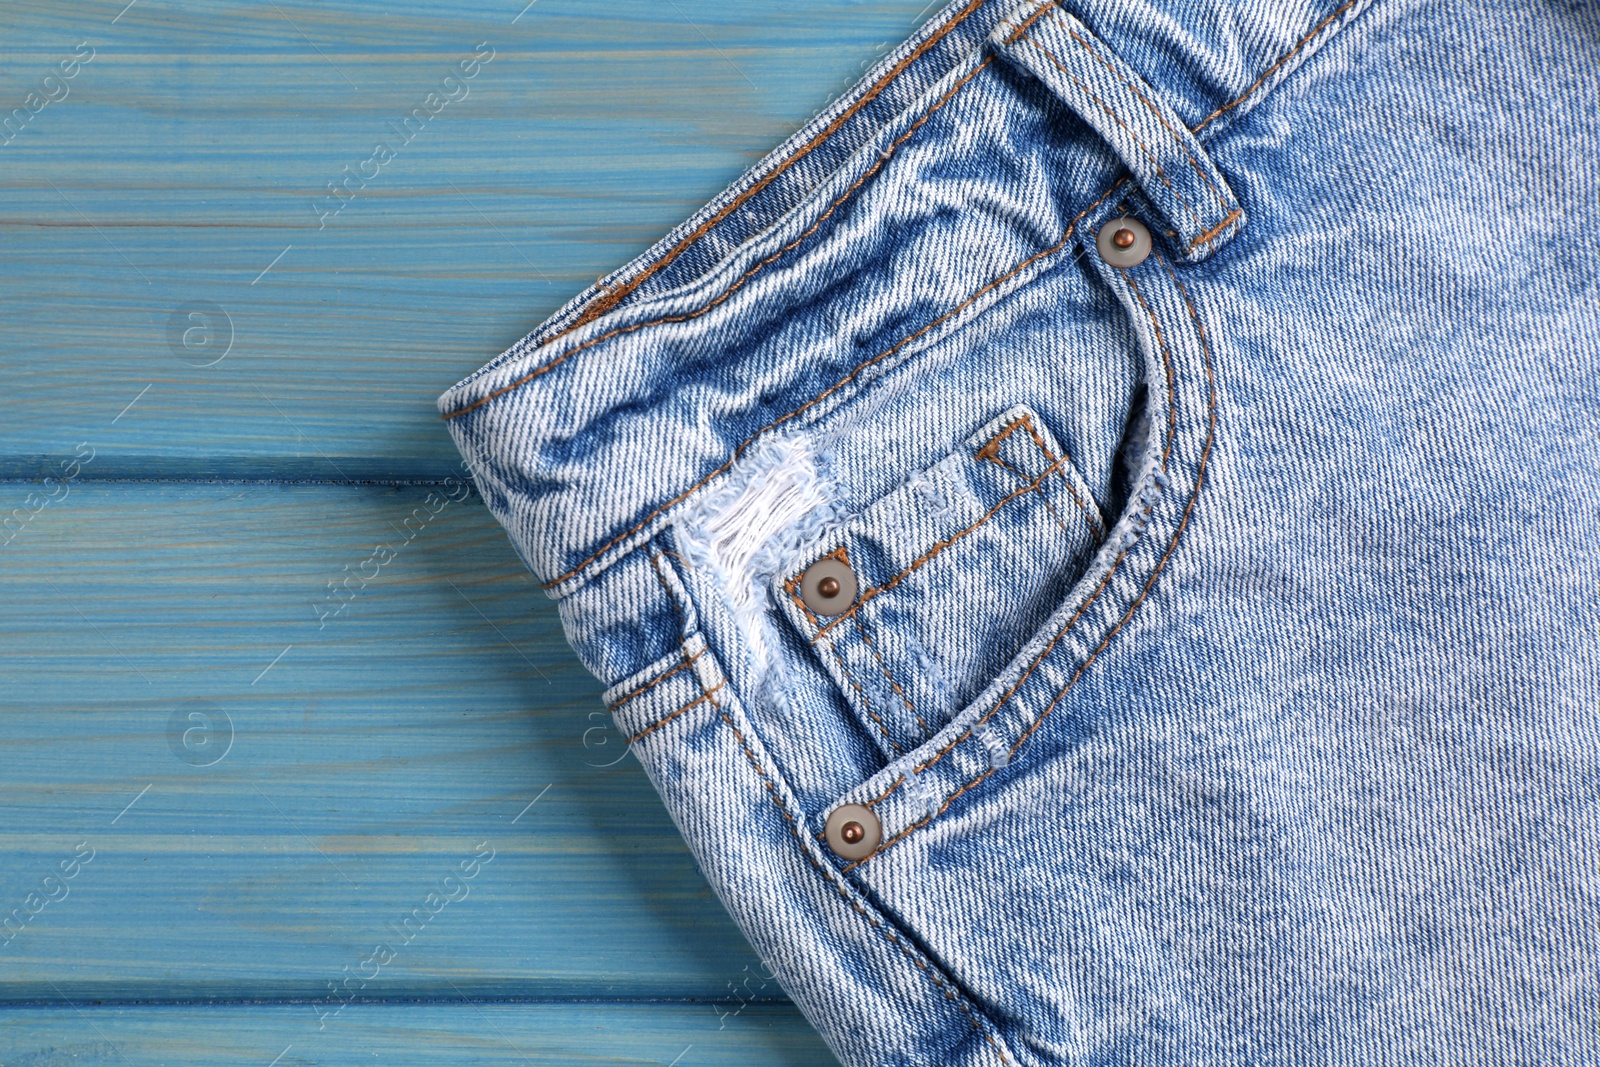 Photo of Stylish light blue jeans on wooden background, closeup of inset pocket